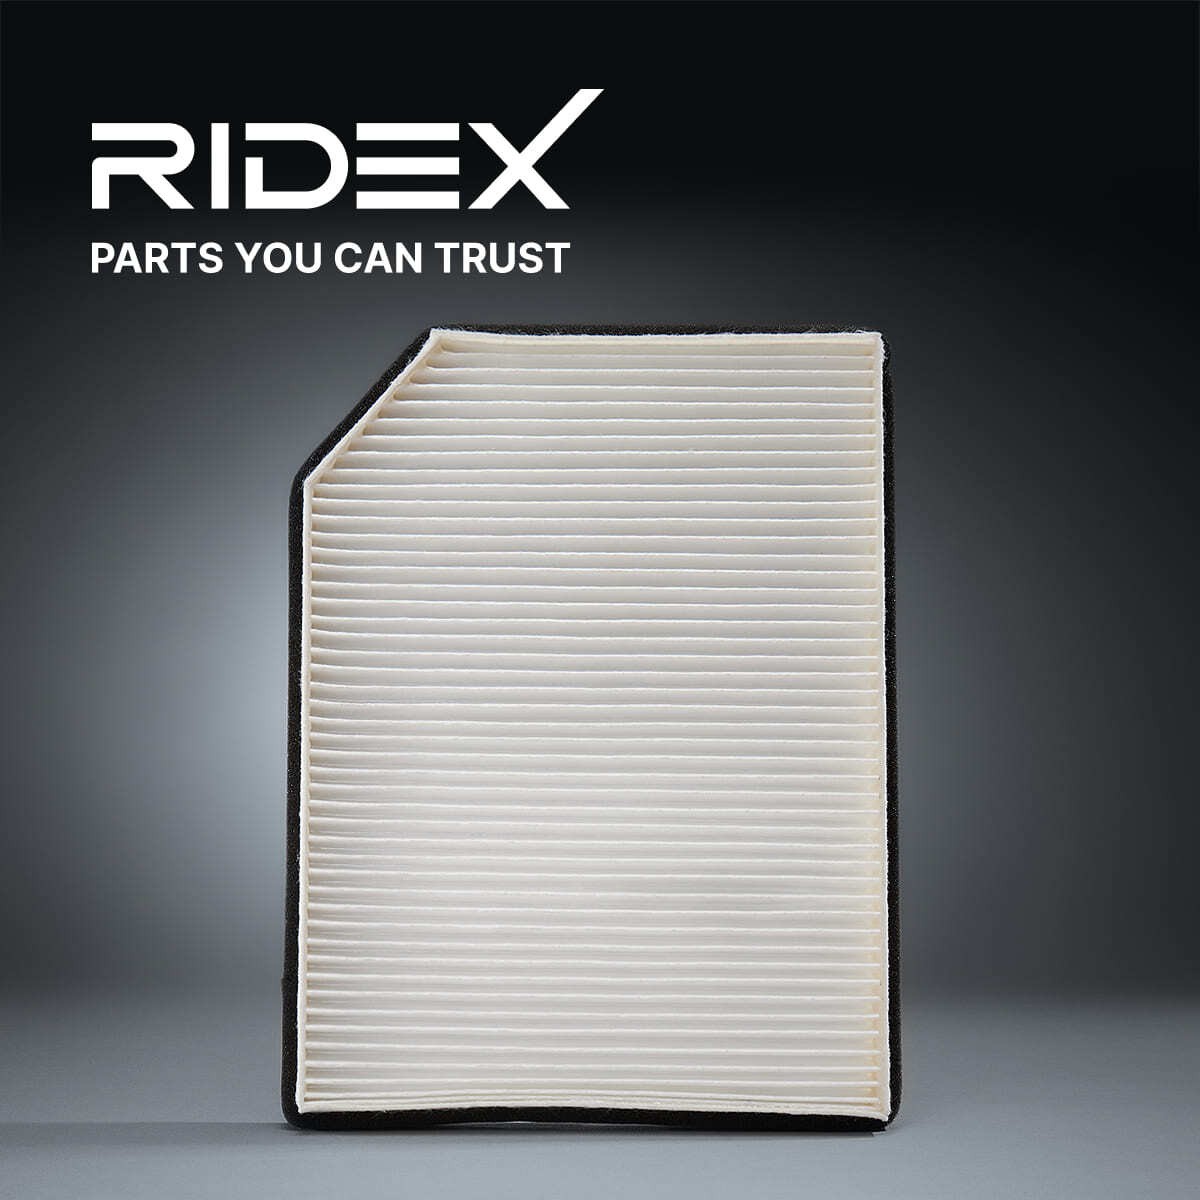 RIDEX 424I0223 Air conditioner filter Activated Carbon Filter, 255 mm x 252 mm x 36 mm